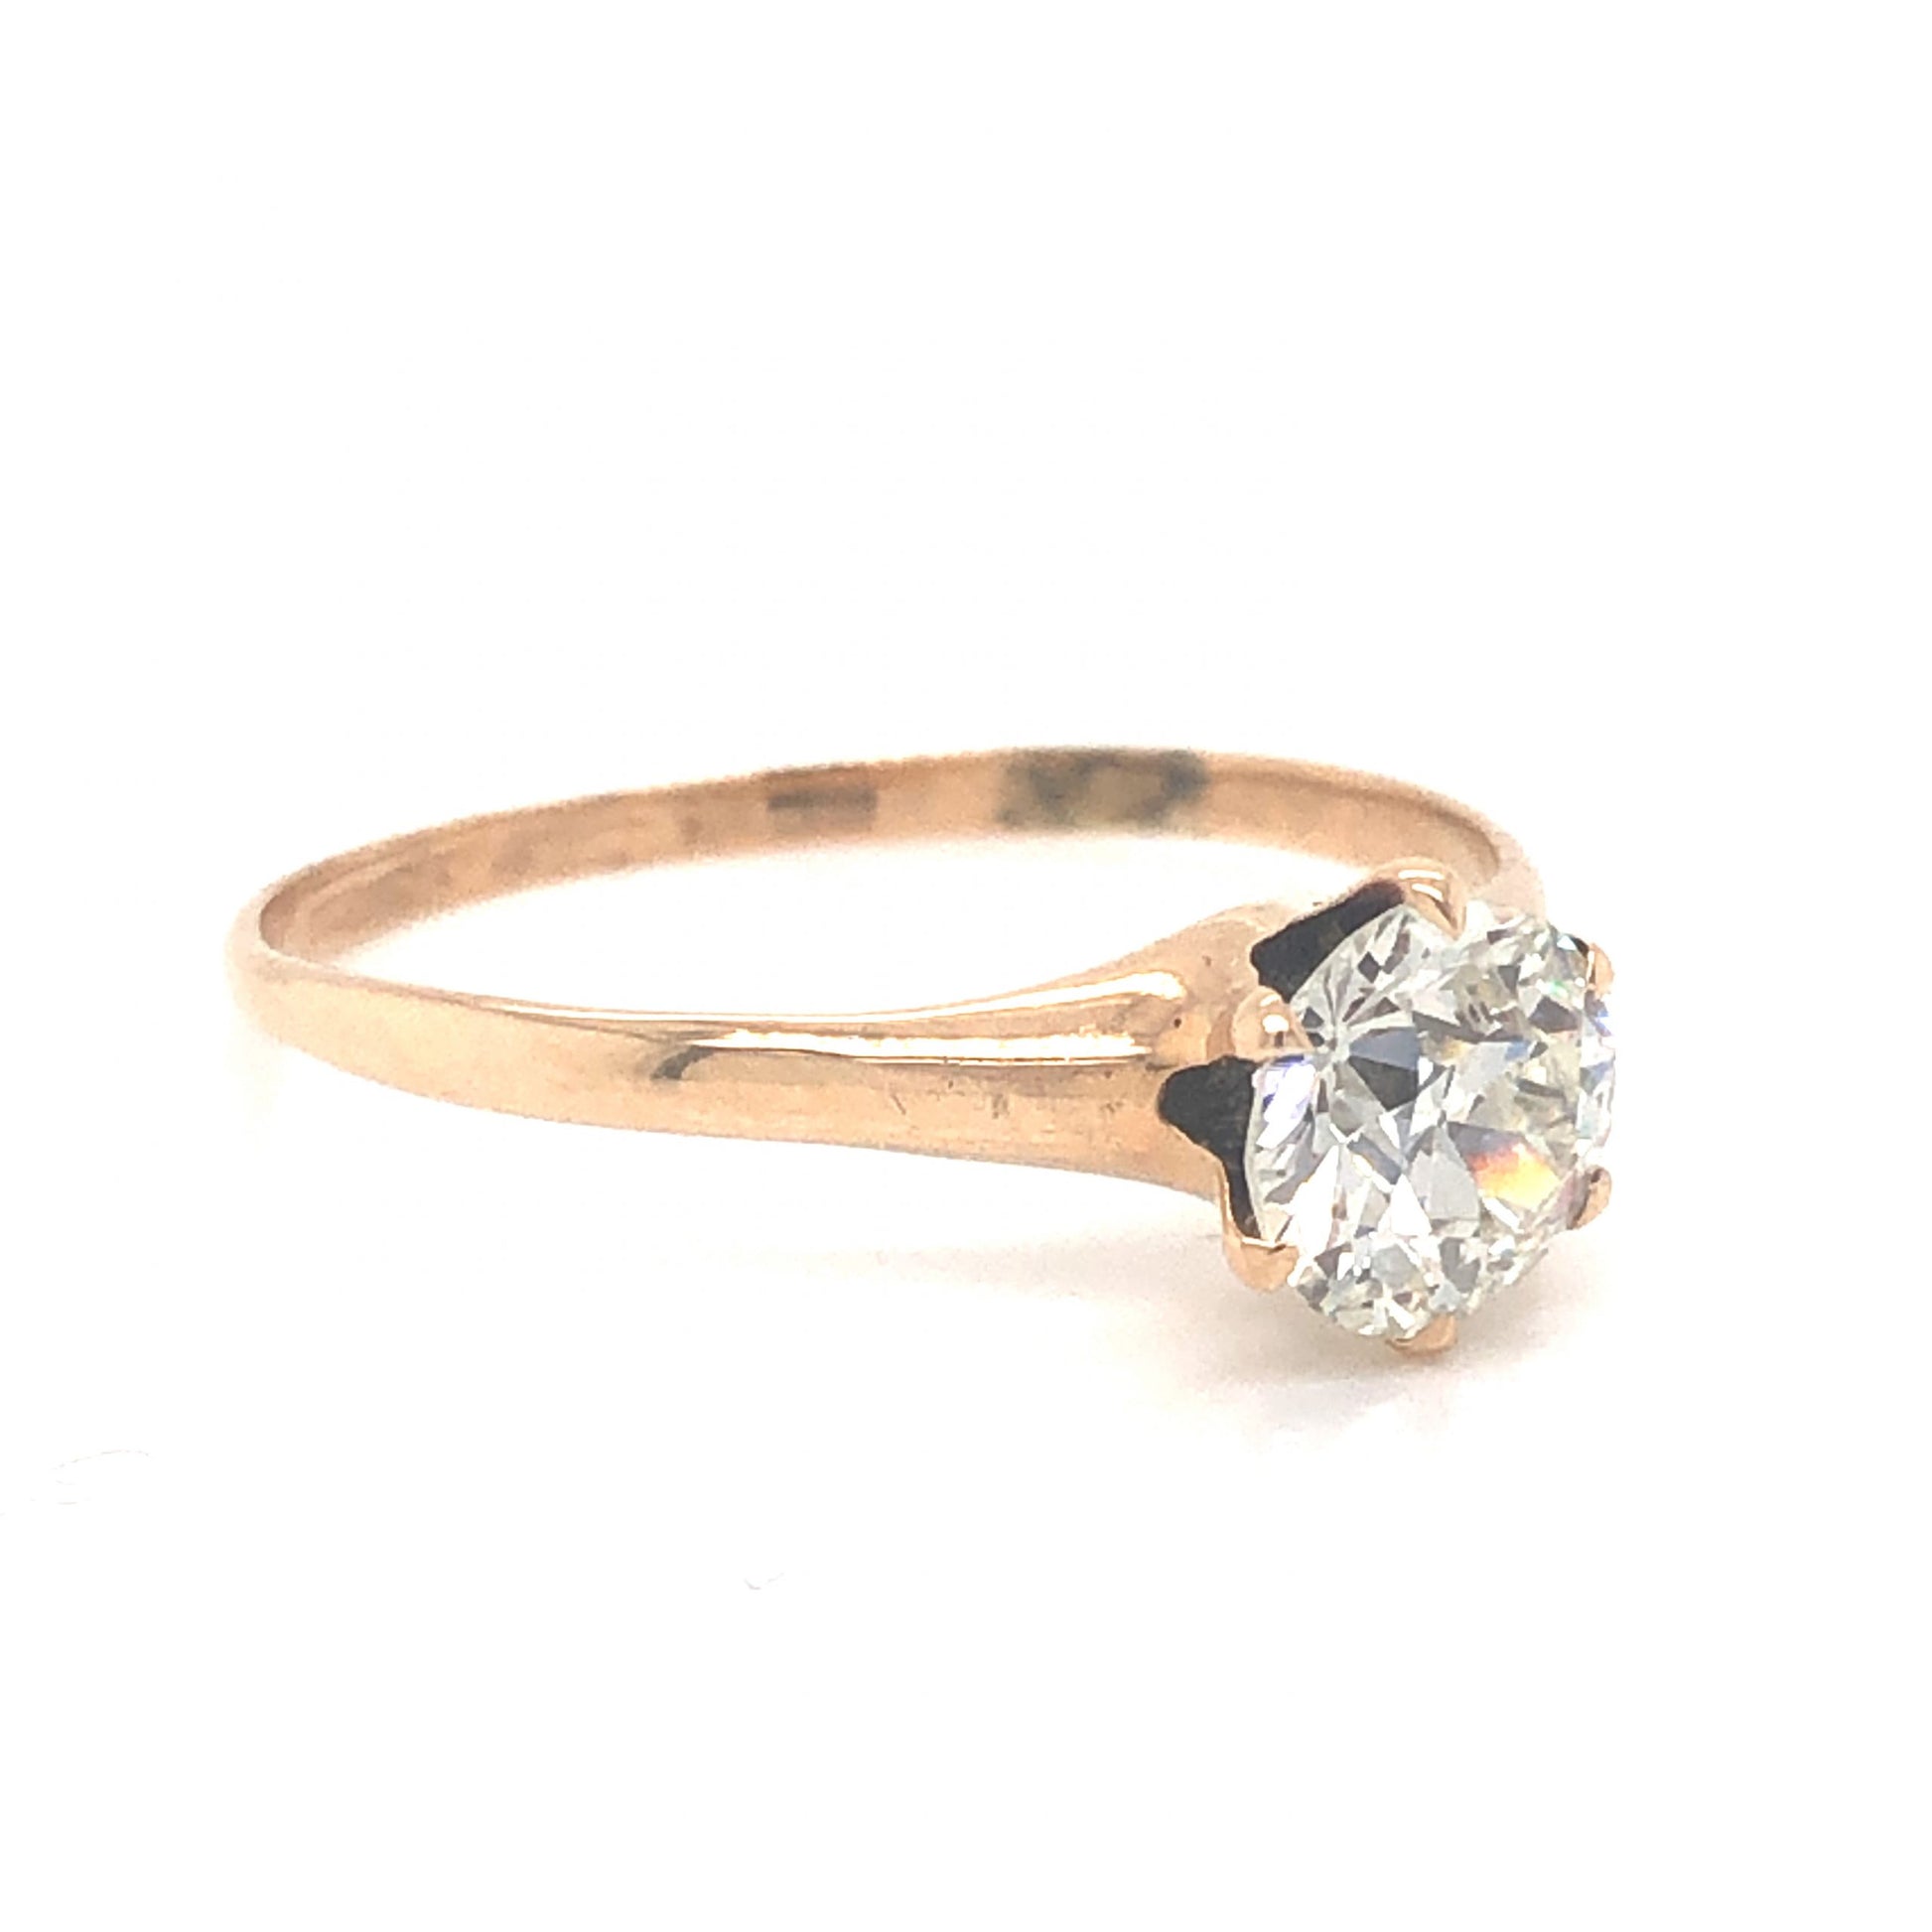 .83 Victorian Solitaire Diamond Engagement Ring in 14k Yellow GoldComposition: Platinum Ring Size: 8 Total Diamond Weight: .83ct Total Gram Weight: 1.3 g